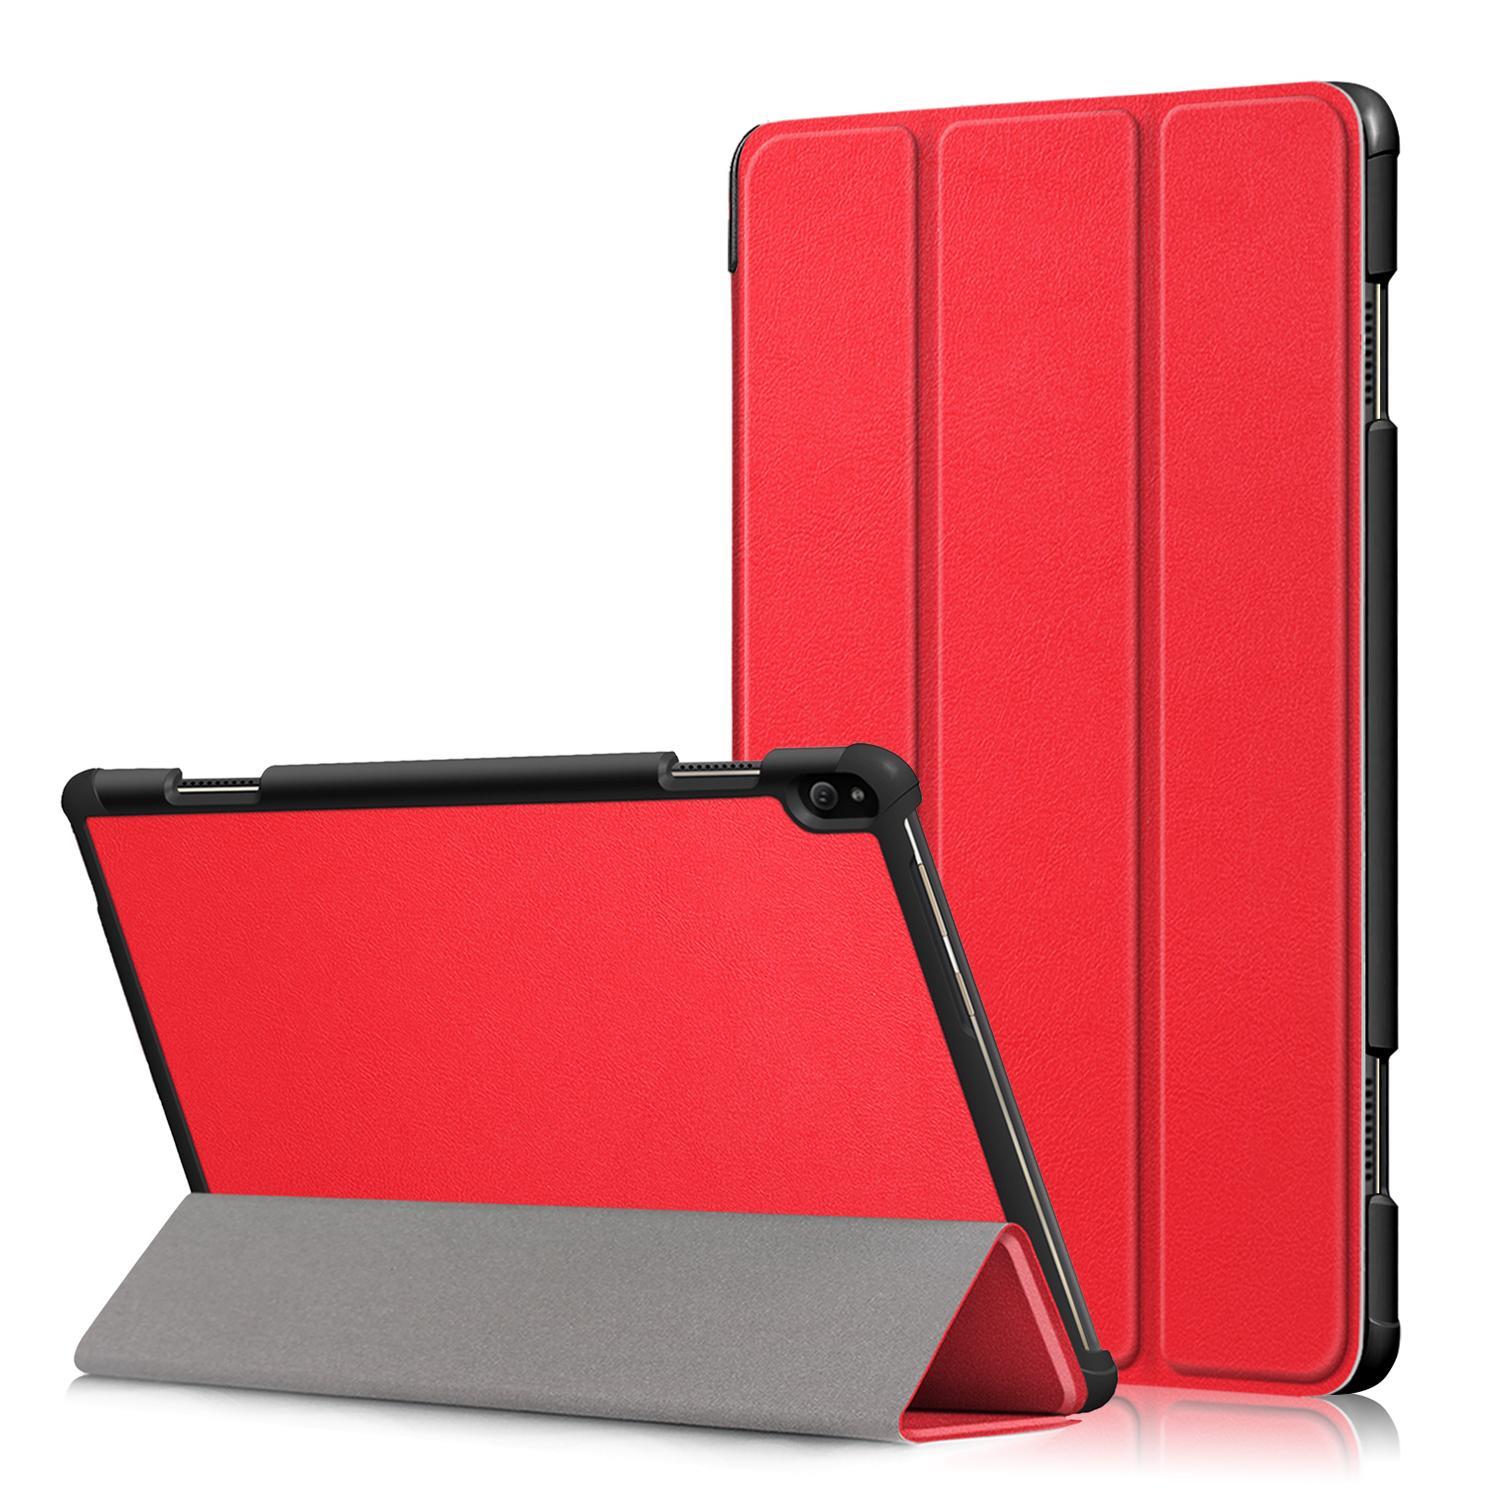 MCC For Lenovo Tab M10 Smart Leather Case Cover Tablet HD TB-X605F TB-X505 10" [Red]